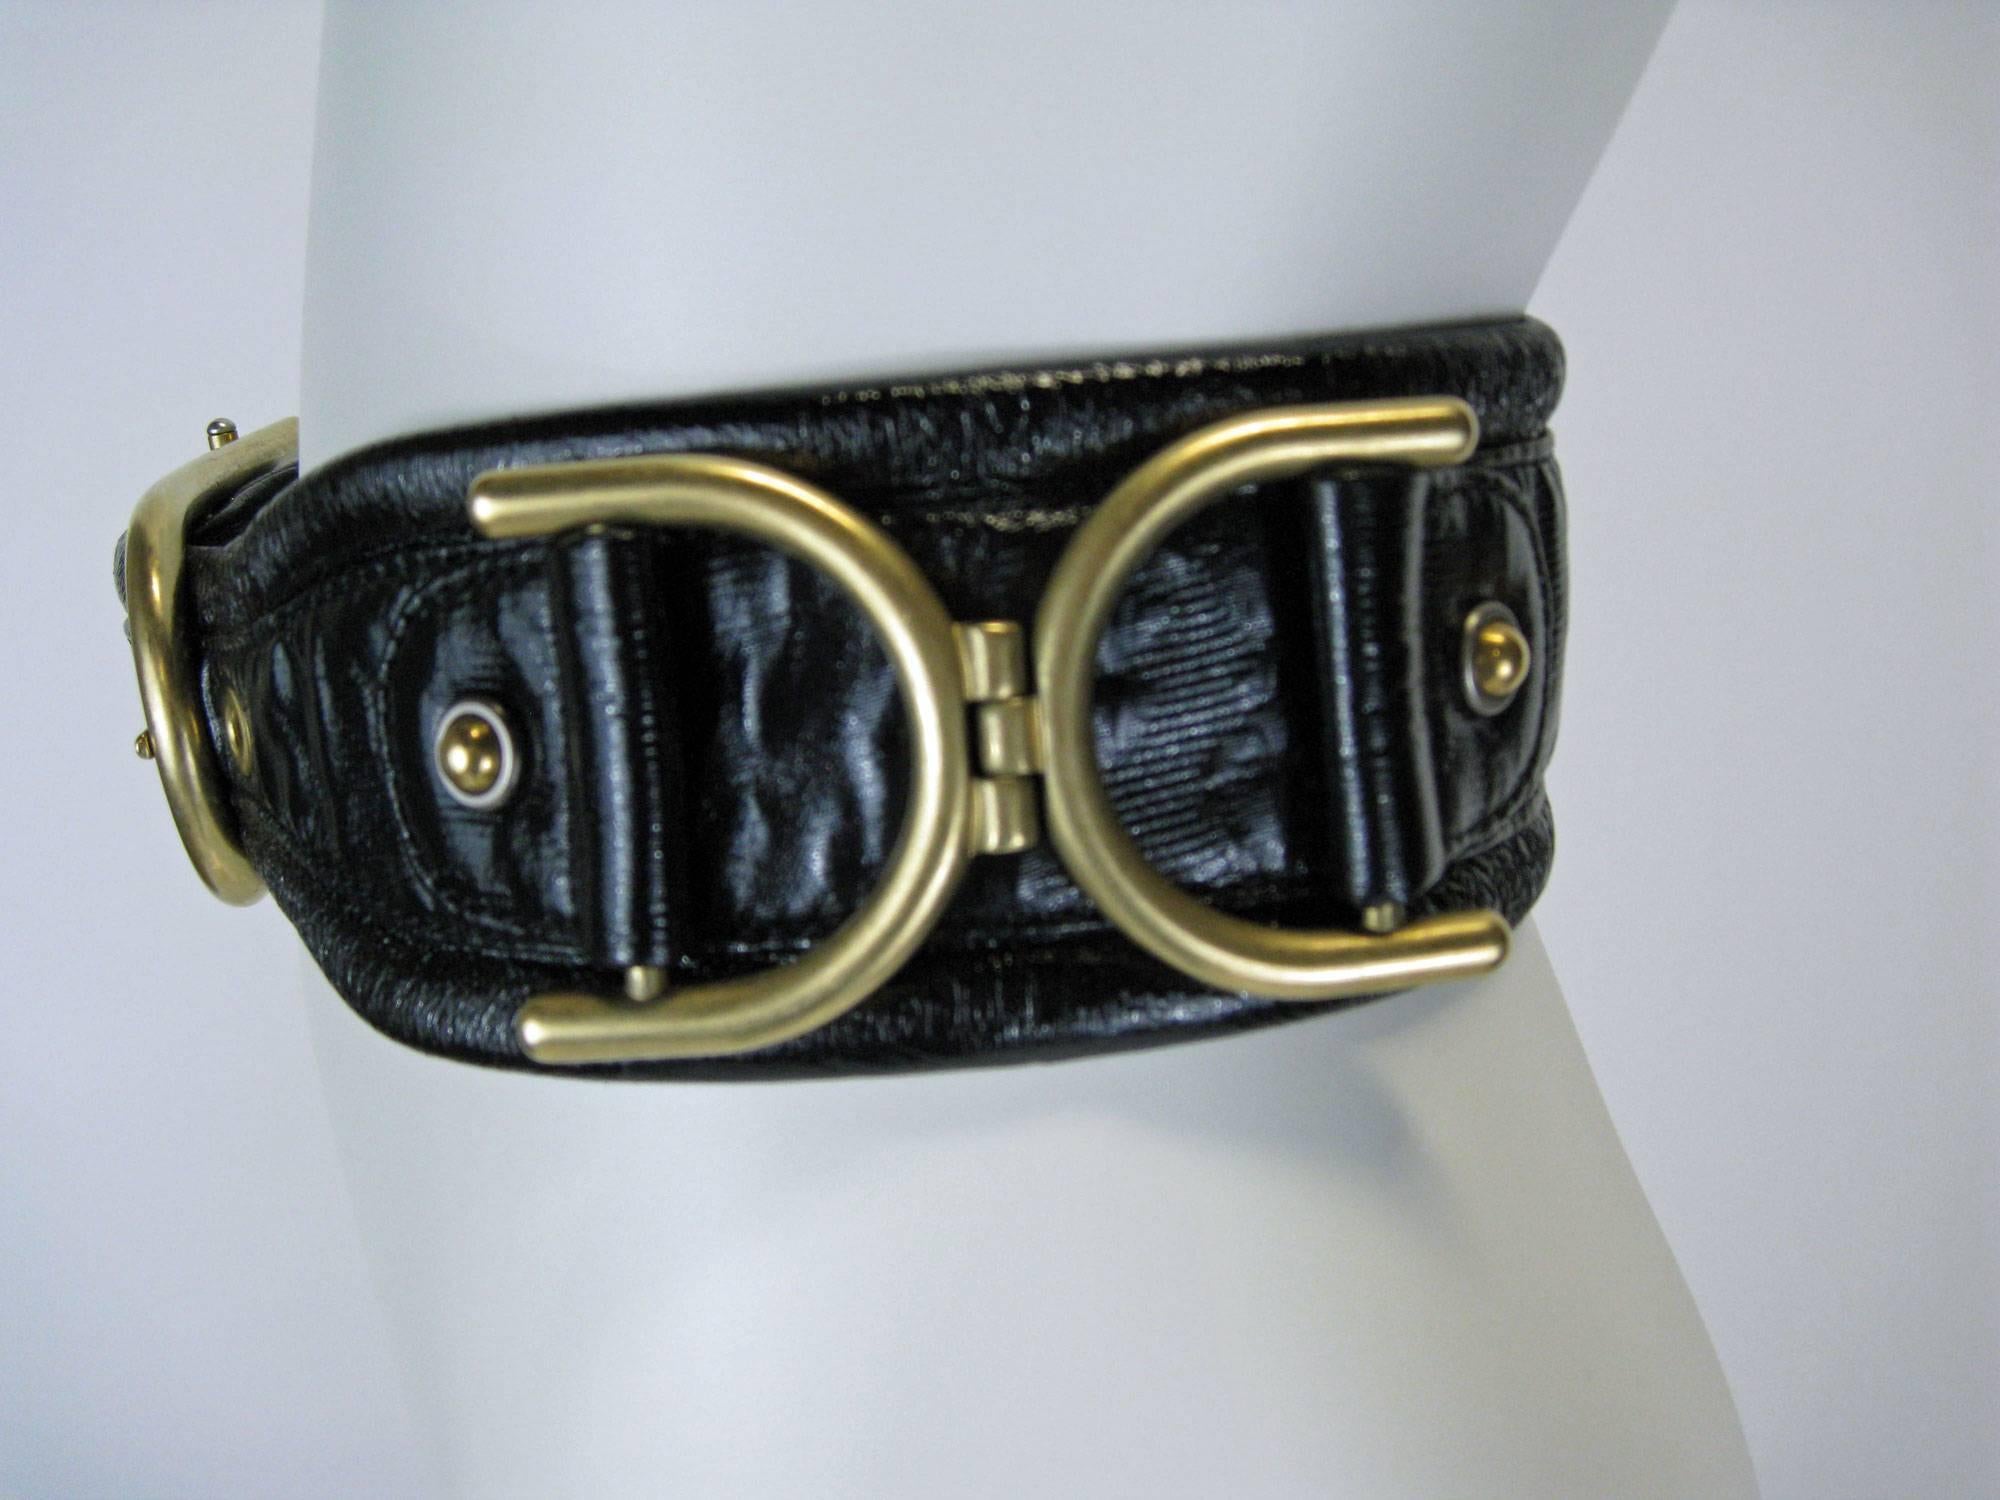 Substantial Stella McCartney leather cinch belt.
Shiny black, not quite patent leather with embossed texture.
Large brass horseshoe buckle with brass grommeted holes.
Double horseshoe hardware on sides with studs.
Tag reads size